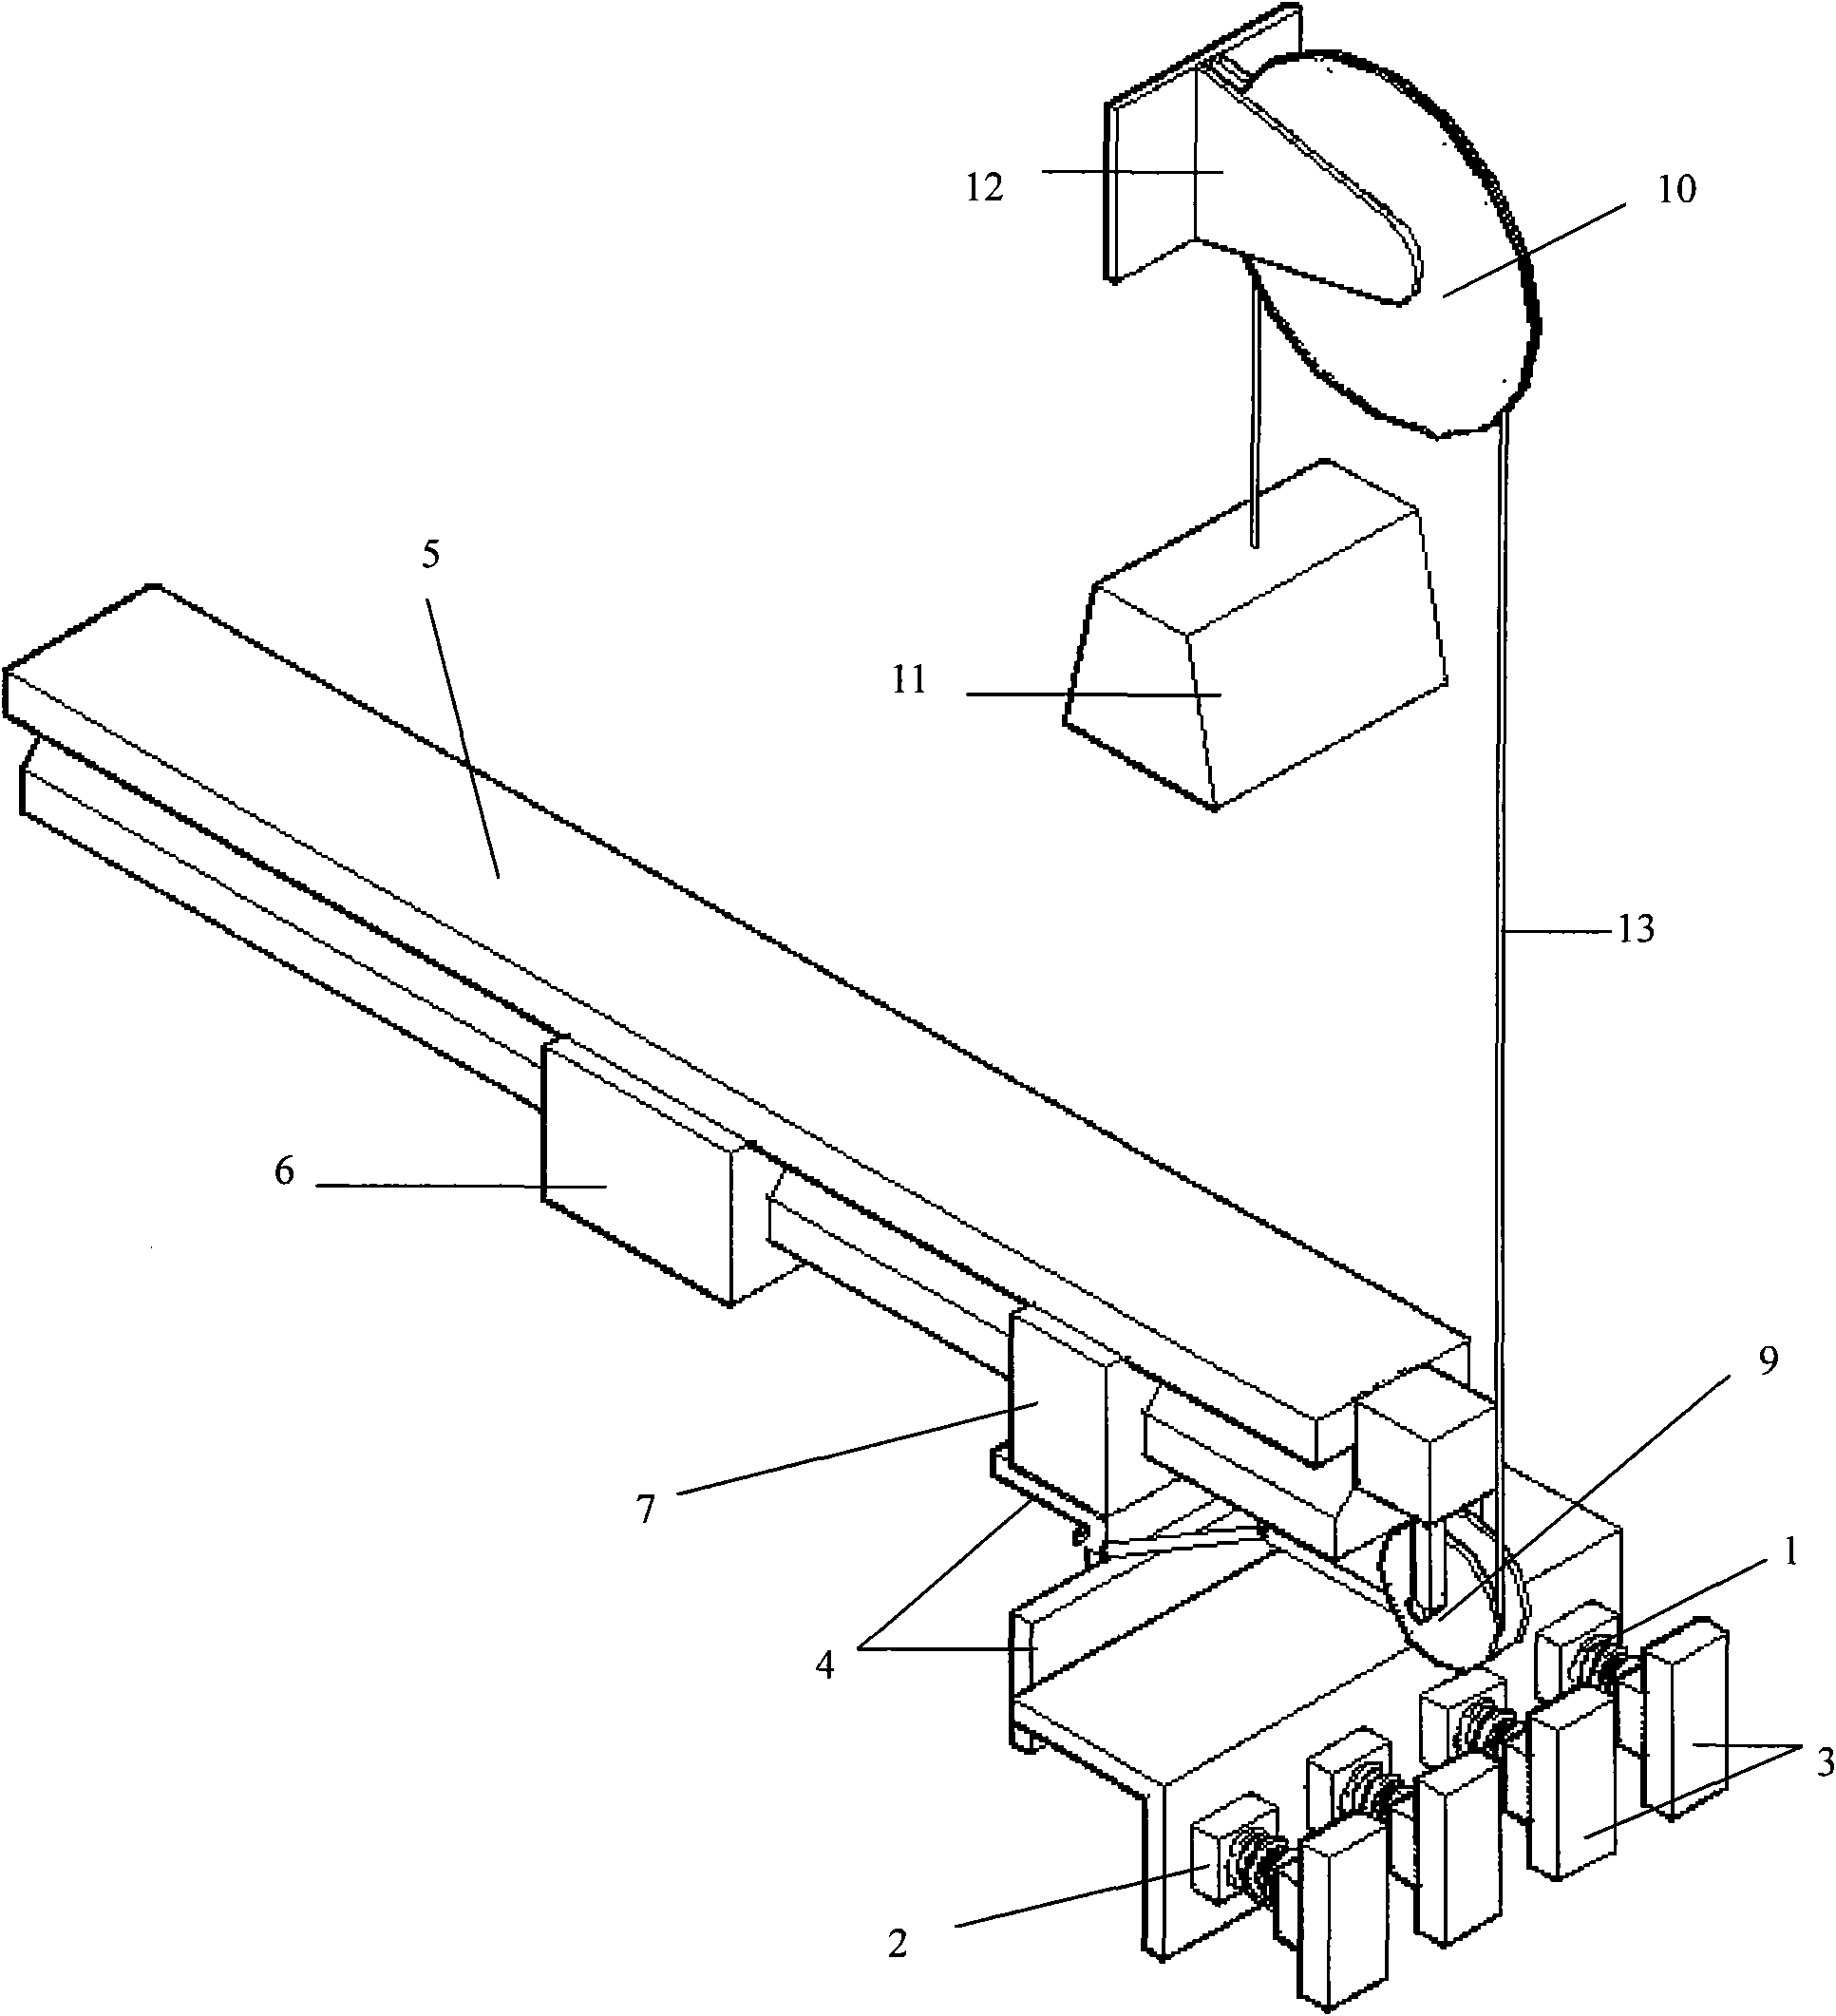 Device for simulating pre-tensioning of compression-type fender